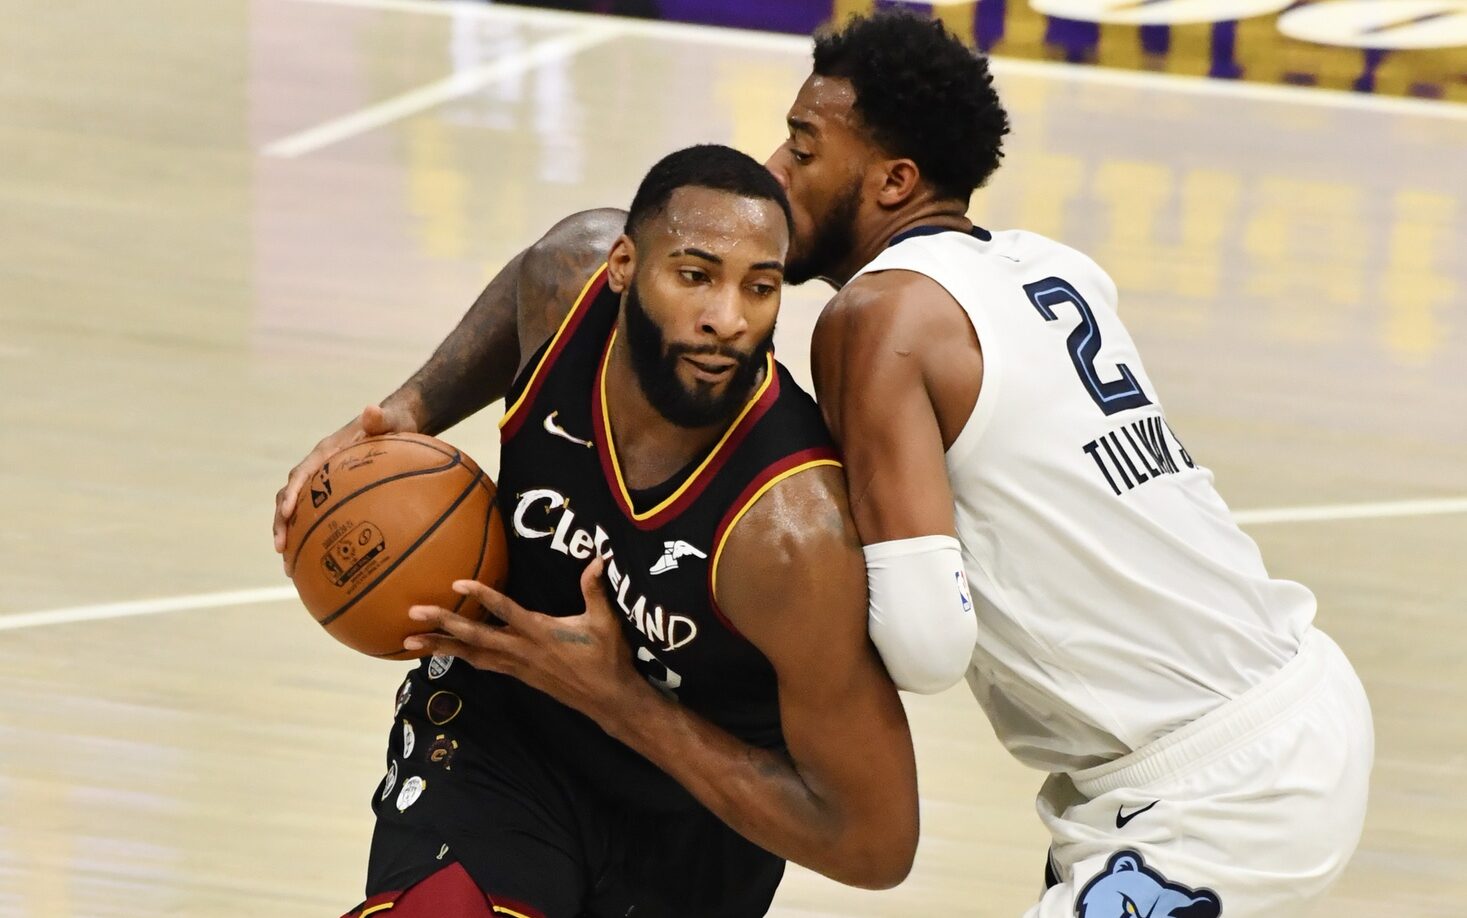 Jan 11, 2021; Cleveland, Ohio, USA; Cleveland Cavaliers center Andre Drummond (3) dribbles the ball while defended by Memphis Grizzlies forward Xavier Tillman (2) during the second quarter at Rocket Mortgage FieldHouse. Mandatory Credit: Ken Blaze-USA TODAY Sports